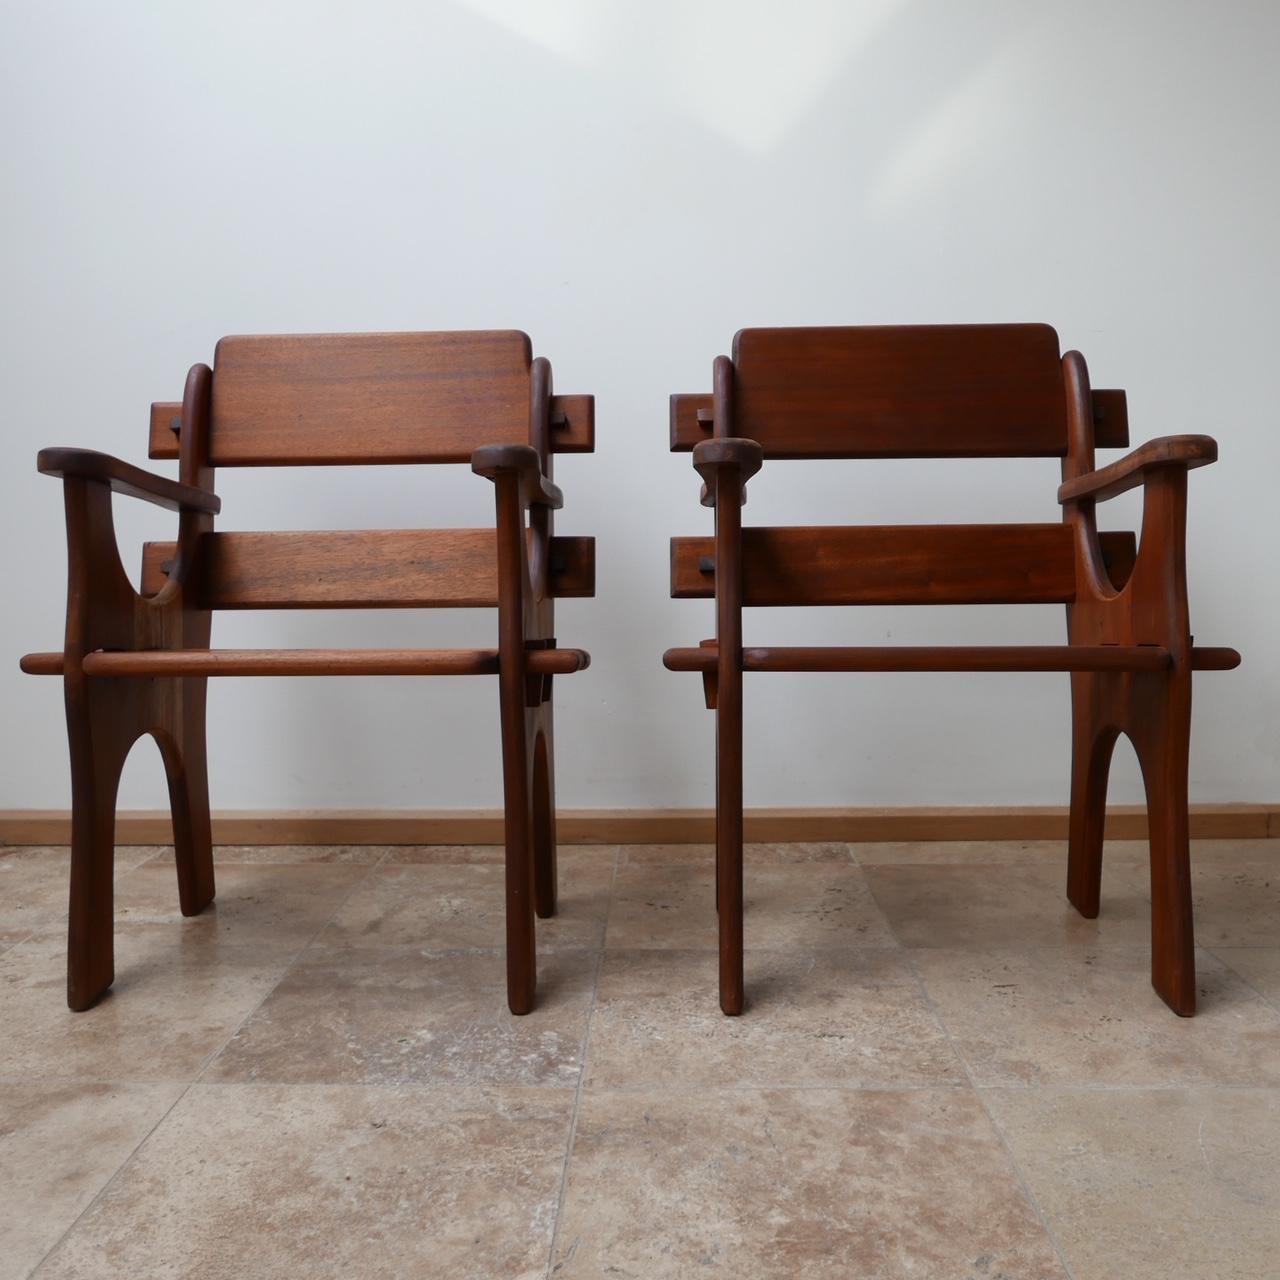 A pair of Brutalist armchairs.

Belgium, circa 1960s.

Believed to be rare Sipo/Utile wood. Unbelievable craftsmanship.

Dimensions: 67 W x 49 D x 43 seat height x 86 total height in cm.
 